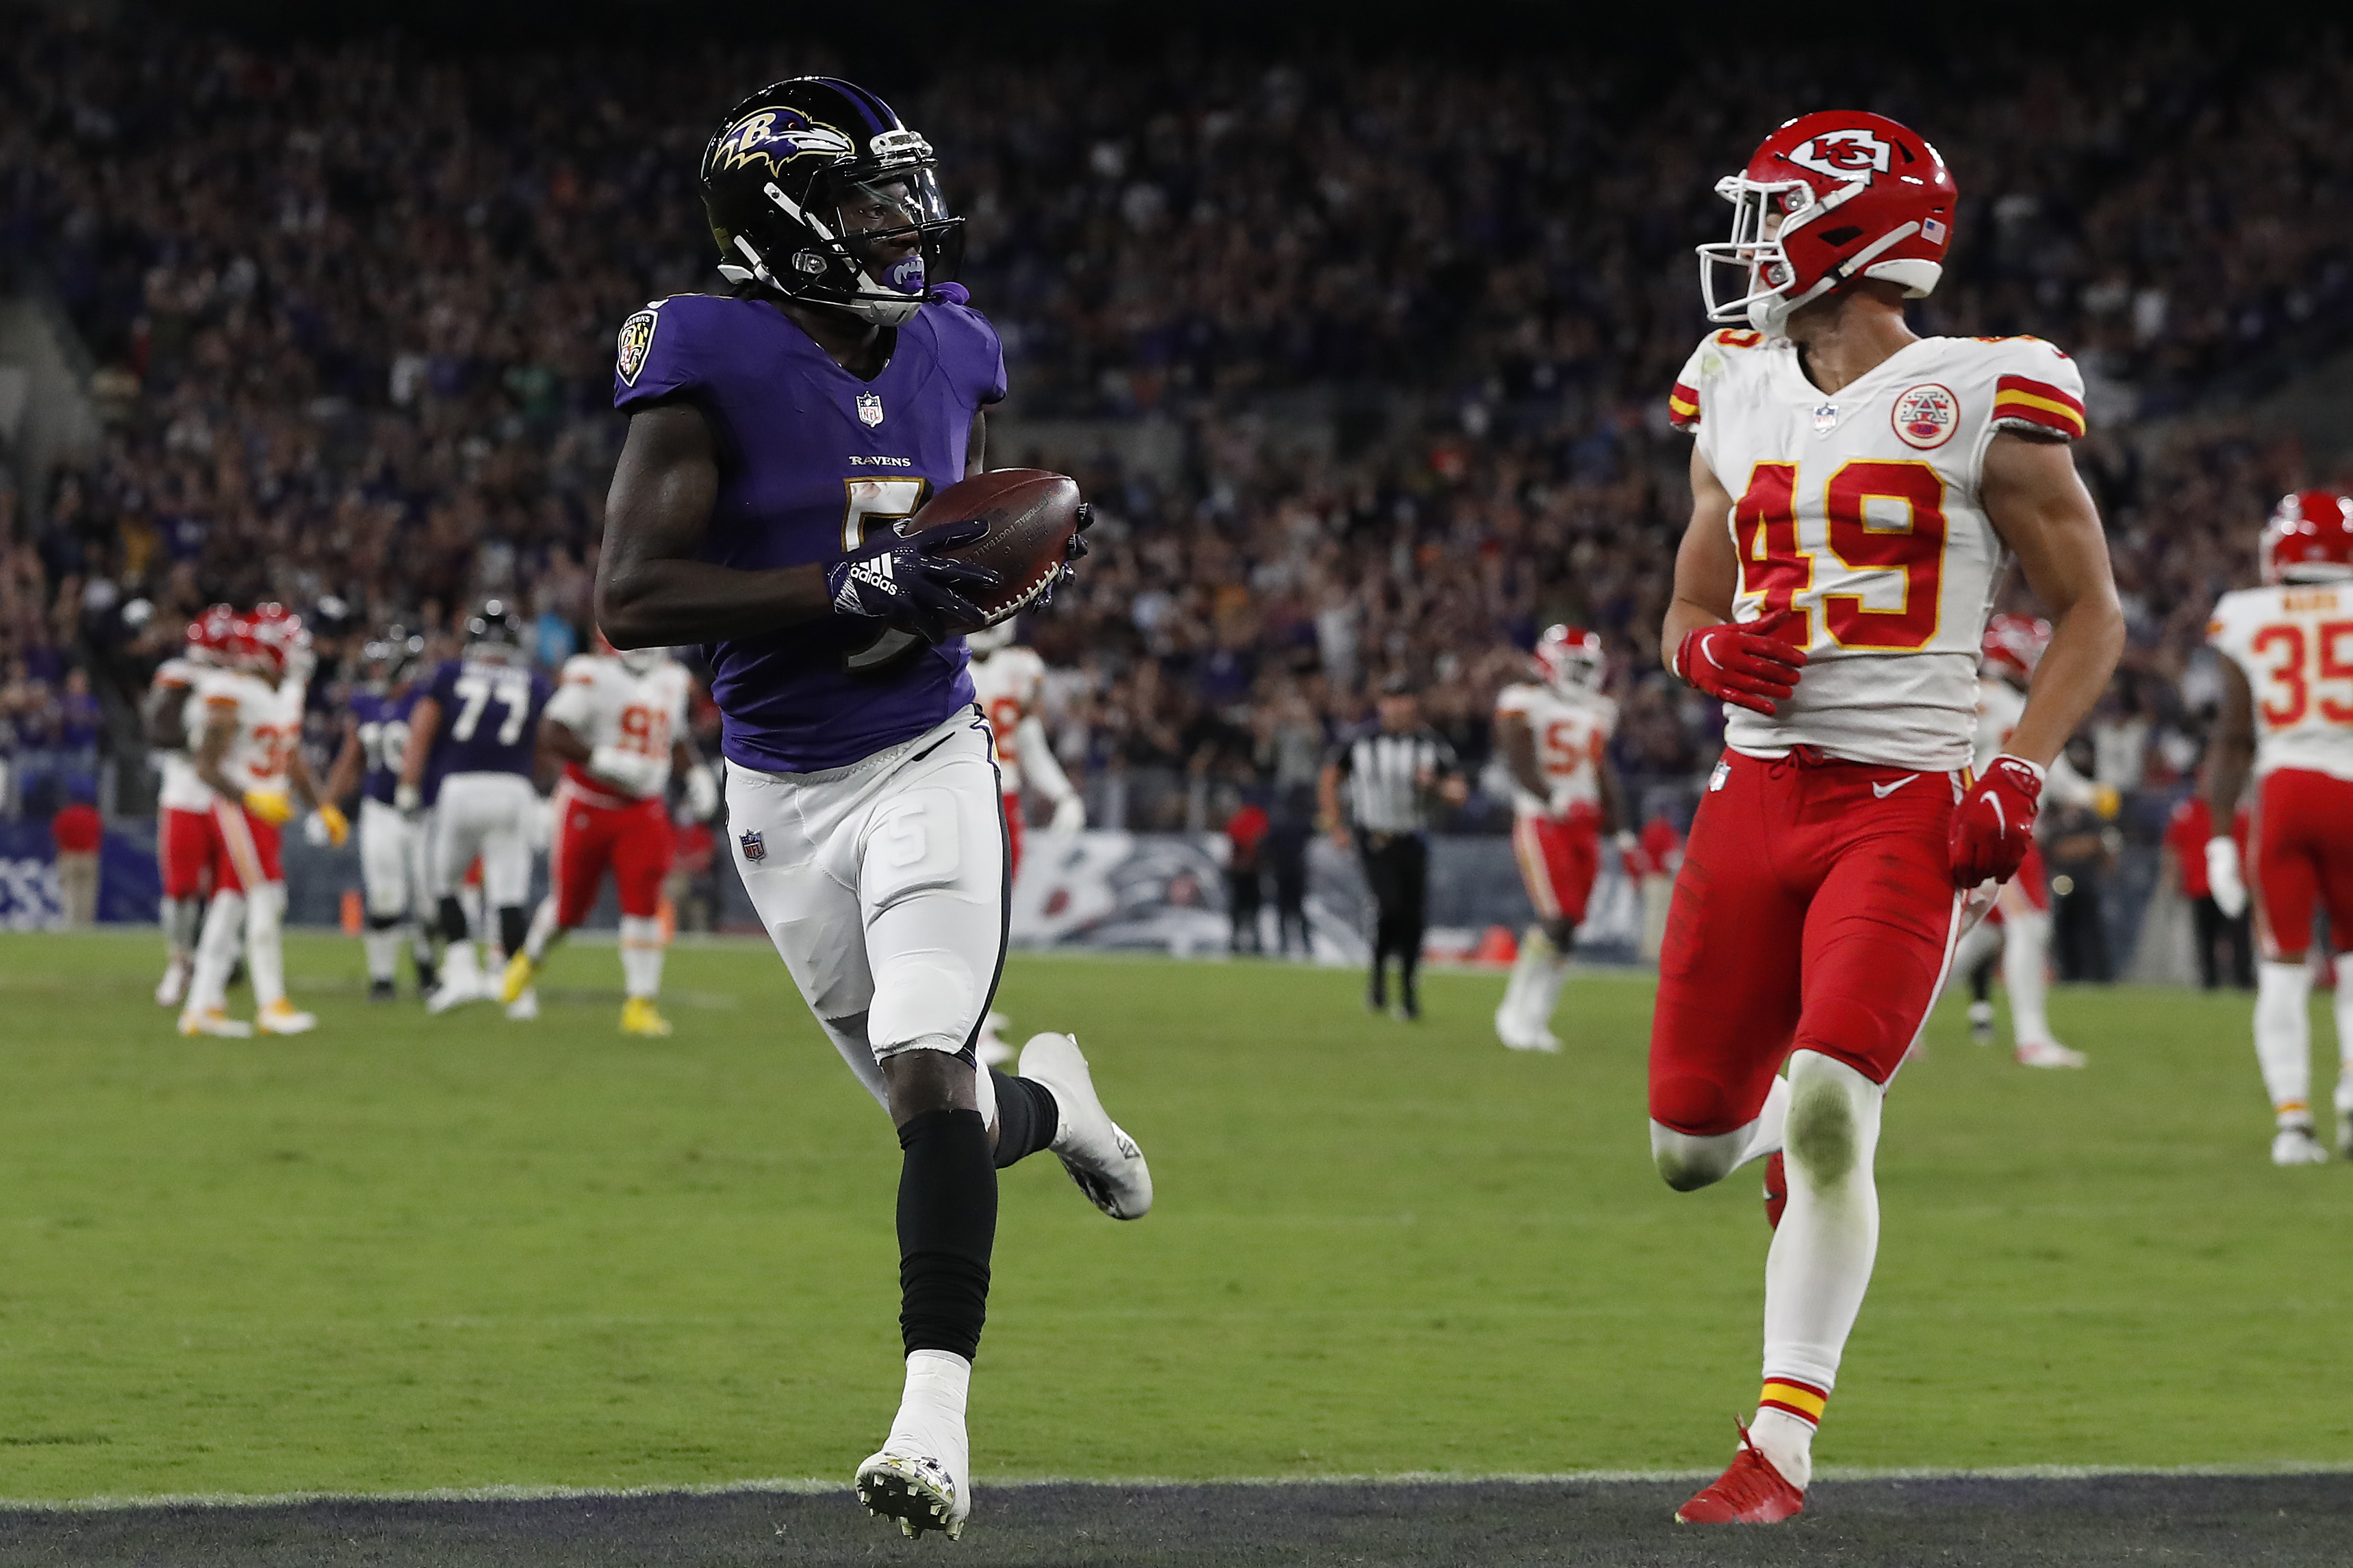 Ravens wide receiver Marquise Brown catches touchdown pass from Lamar Jackson